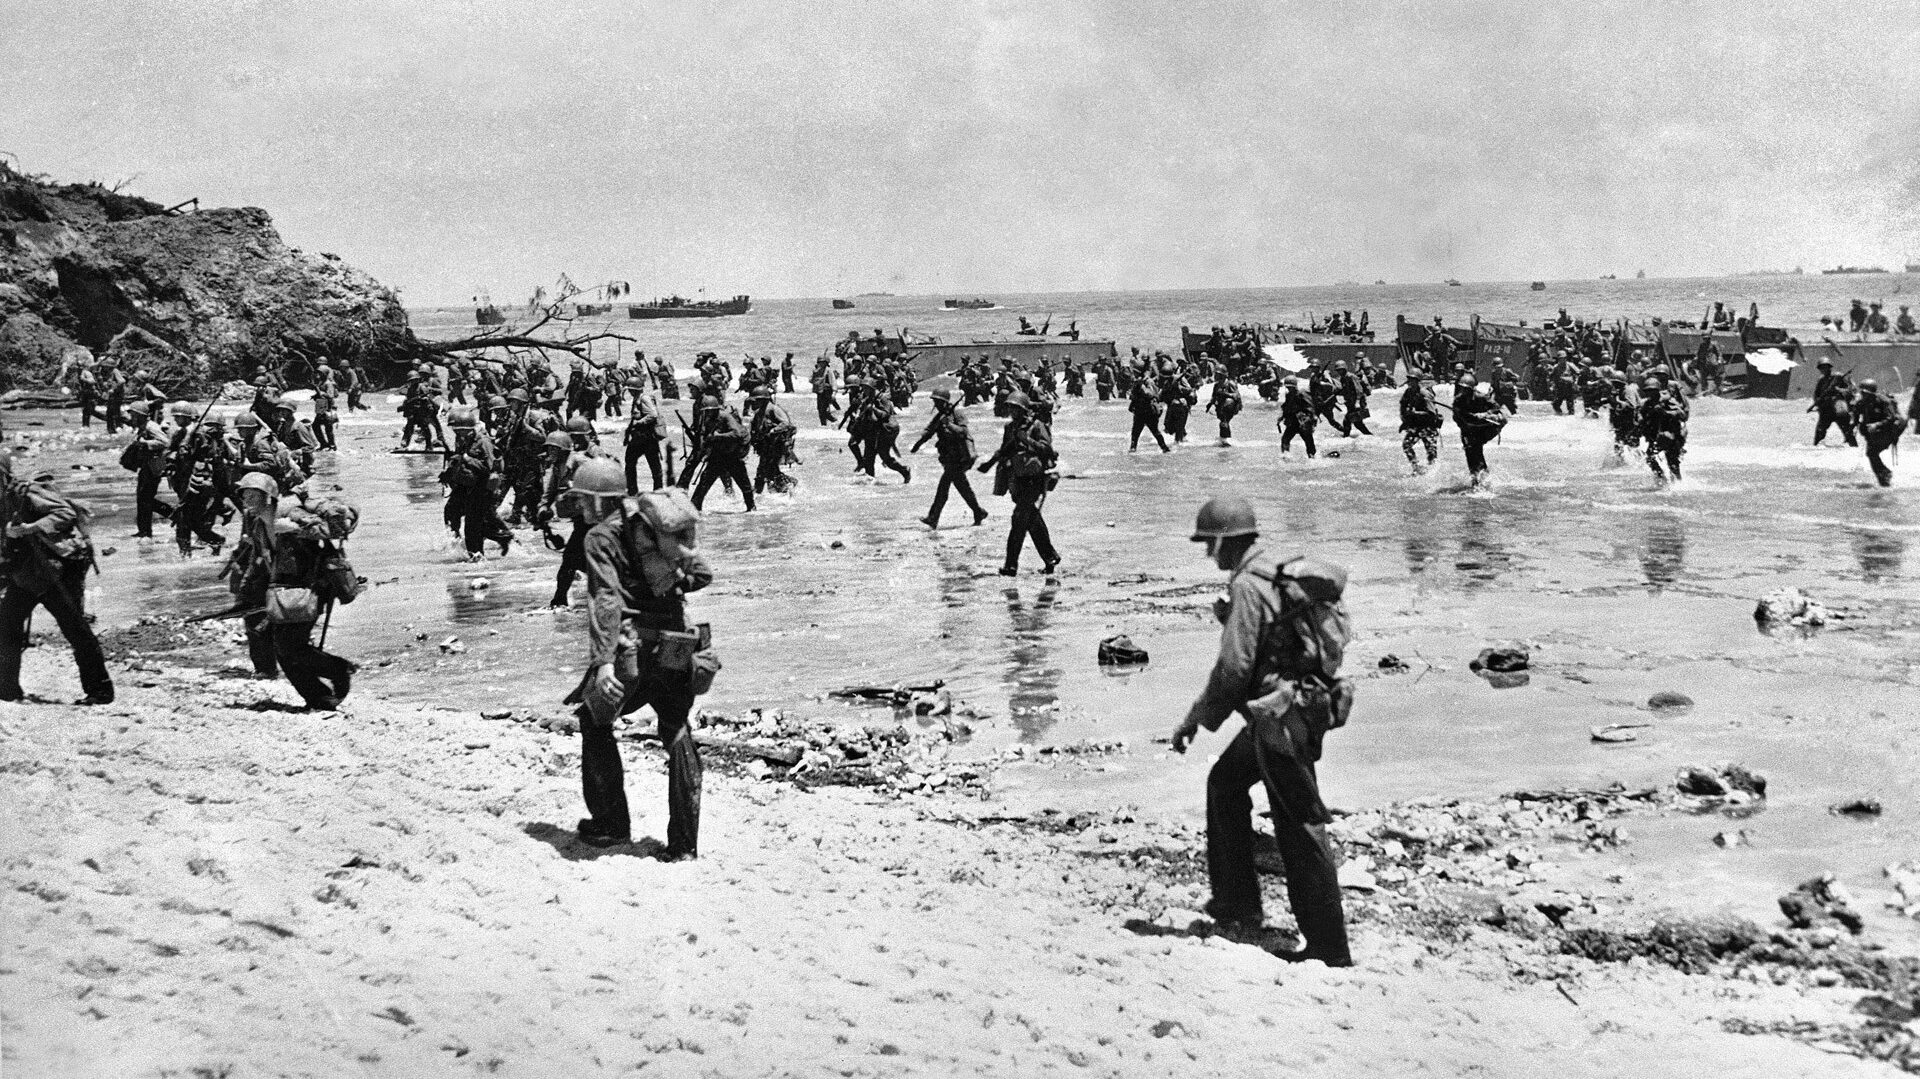 Members of the 81st Infantry Division wade ashore calmly, suggesting that this photo was taken sometime after the initial landings, when hostilities along the beachheads had quieted considerably.